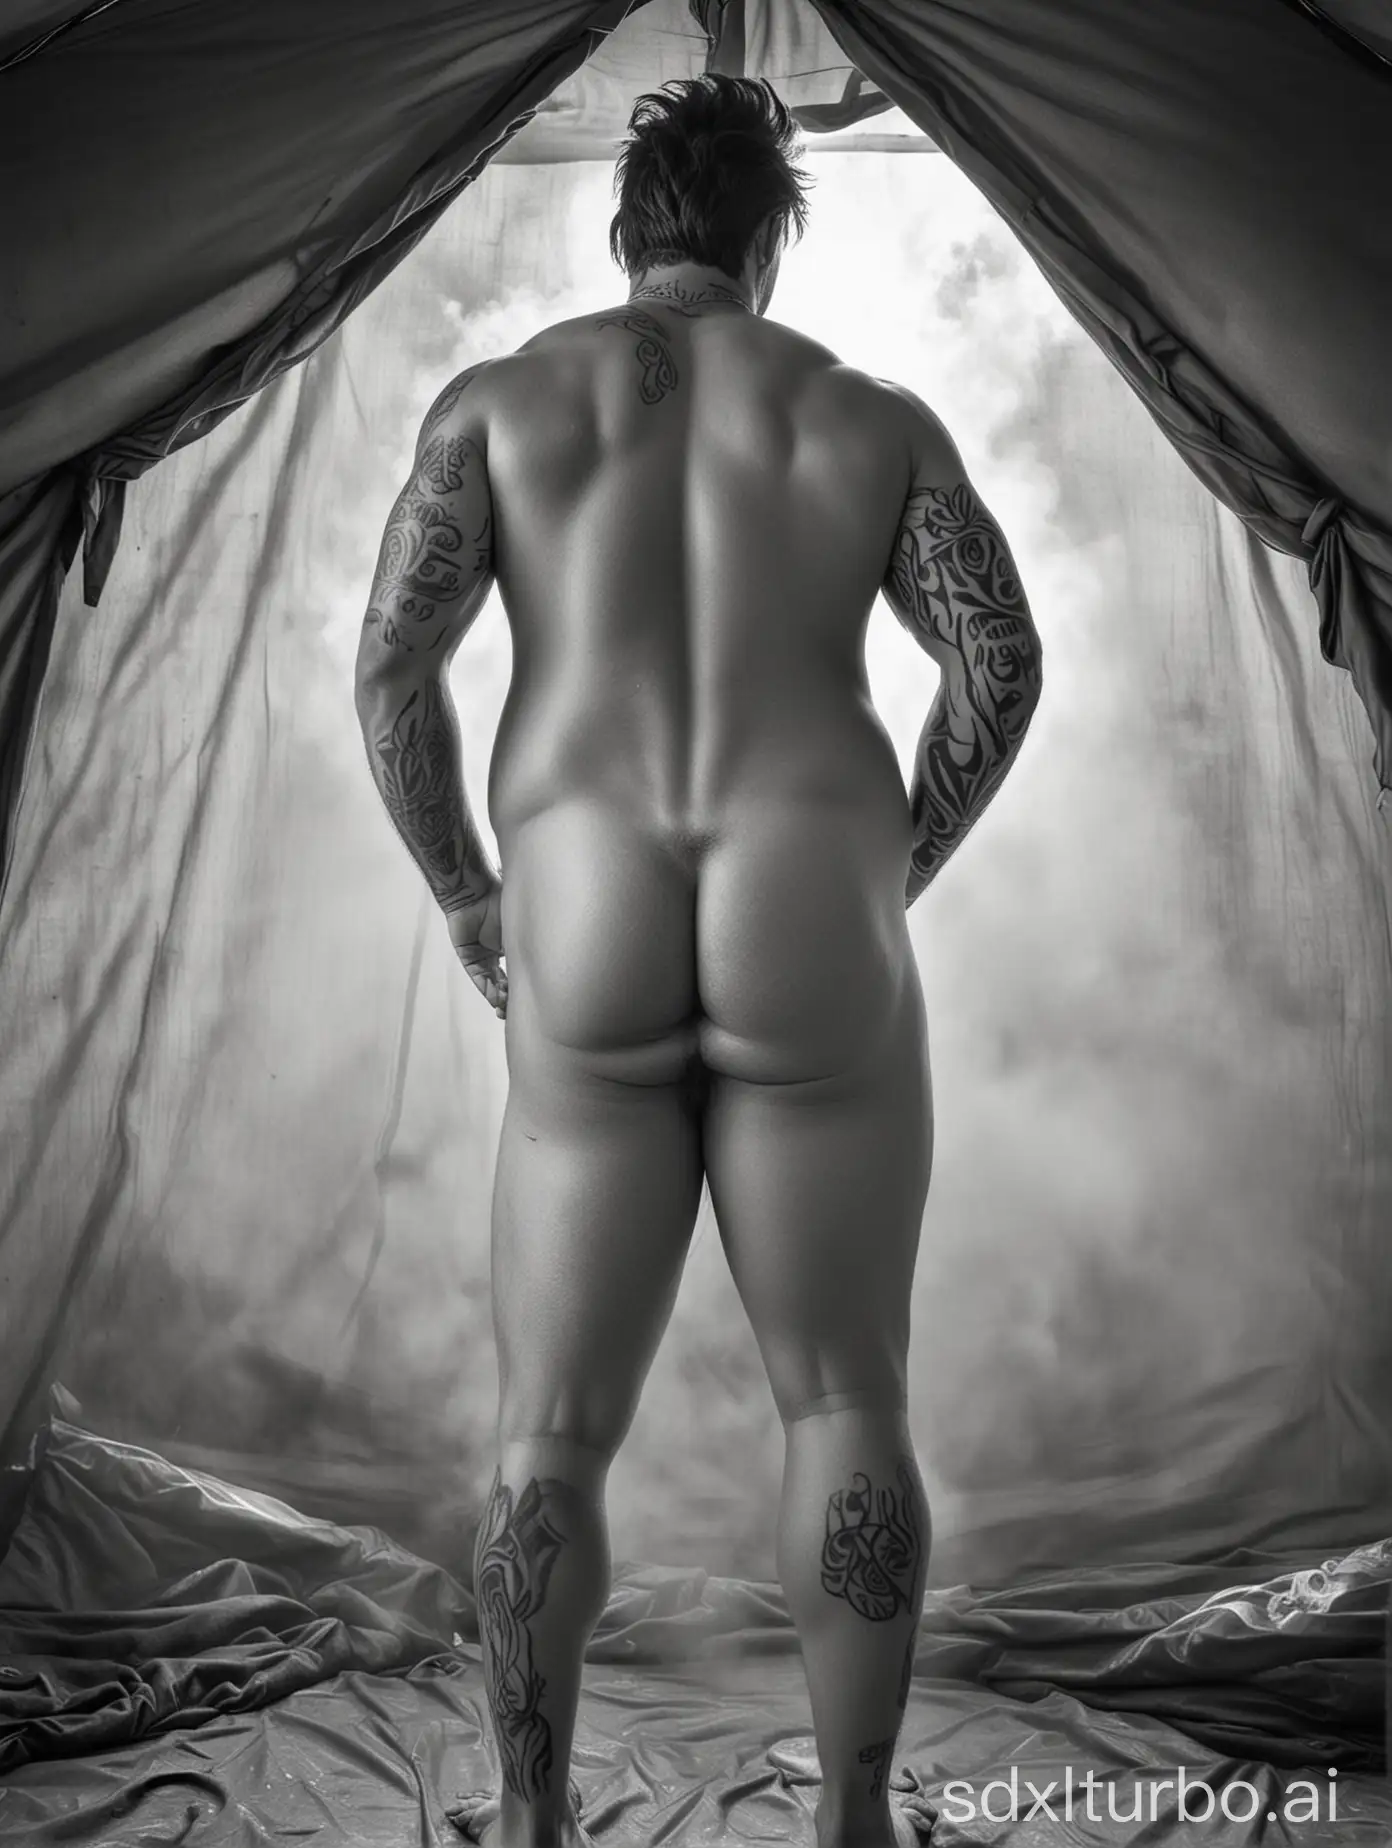 a tall chubby tanned and young man, brown mullet hair, from behind he shows a big butt with mini tattoo, farting while spreading green smoke on his ass, on a obscure environment tent, black and white style